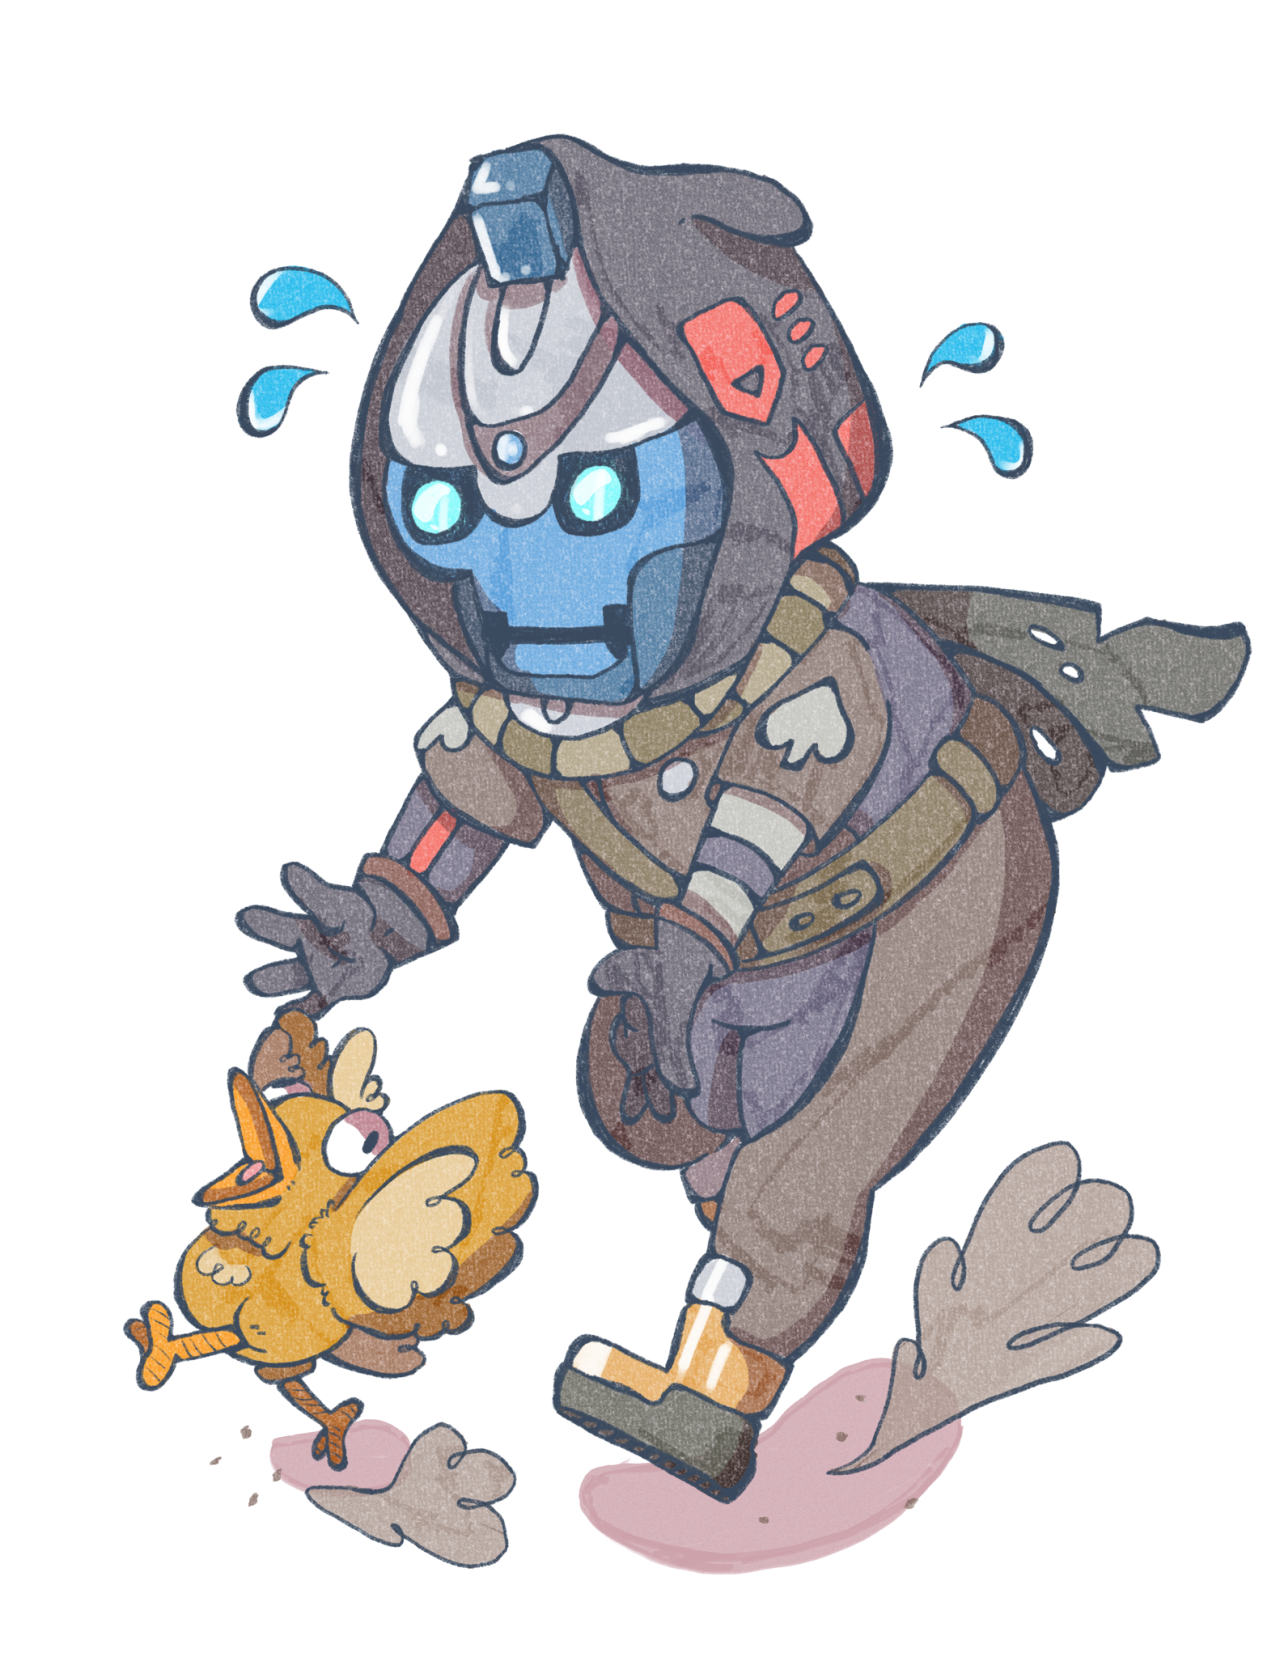 Bethicals — Chibi commission of Cayde-6!